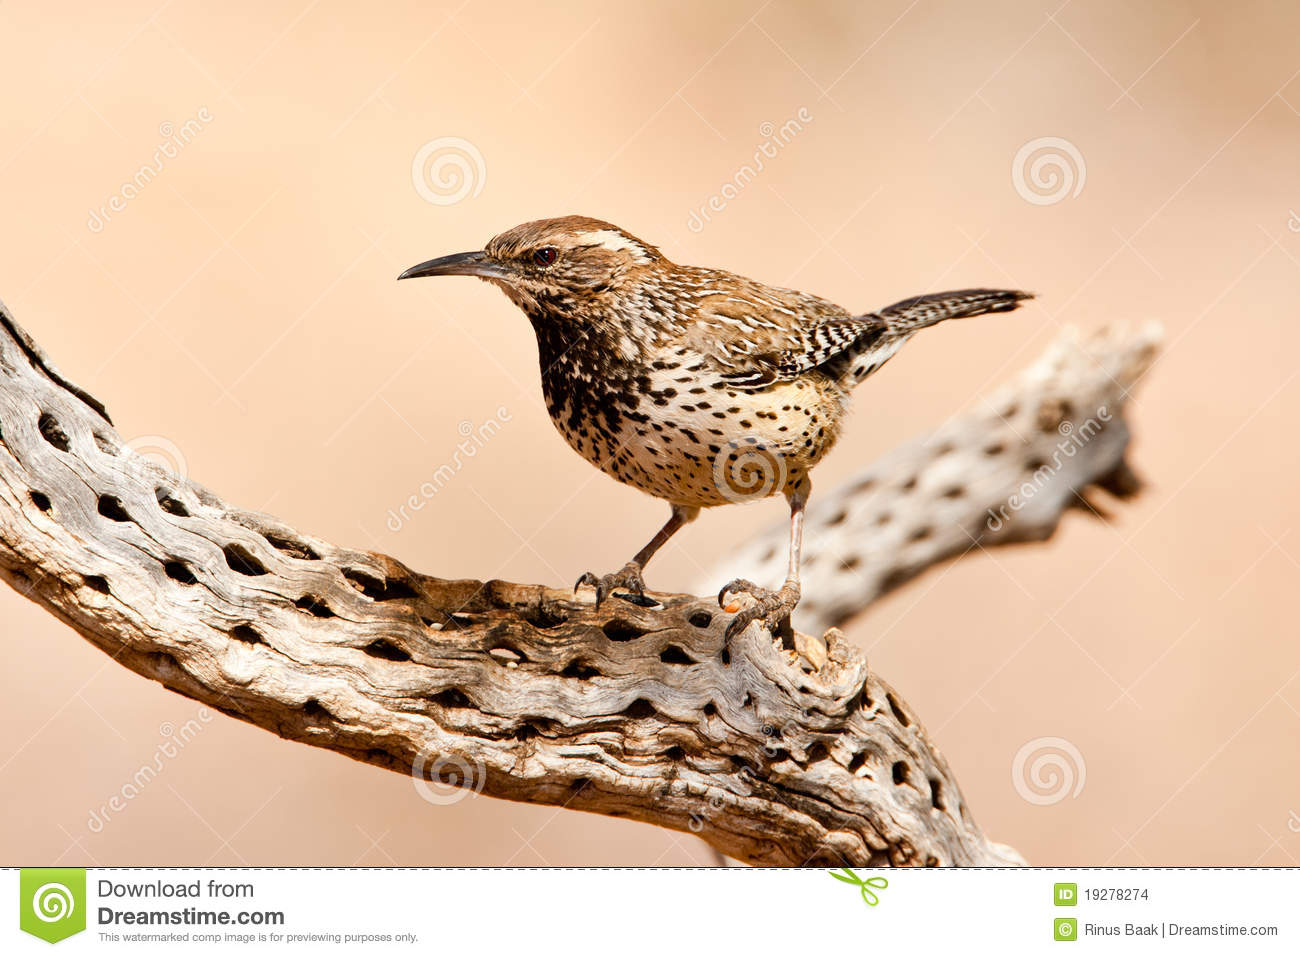     Of Adult Cactus Wren Standing On Top Of Old Cholla Cactus Limb